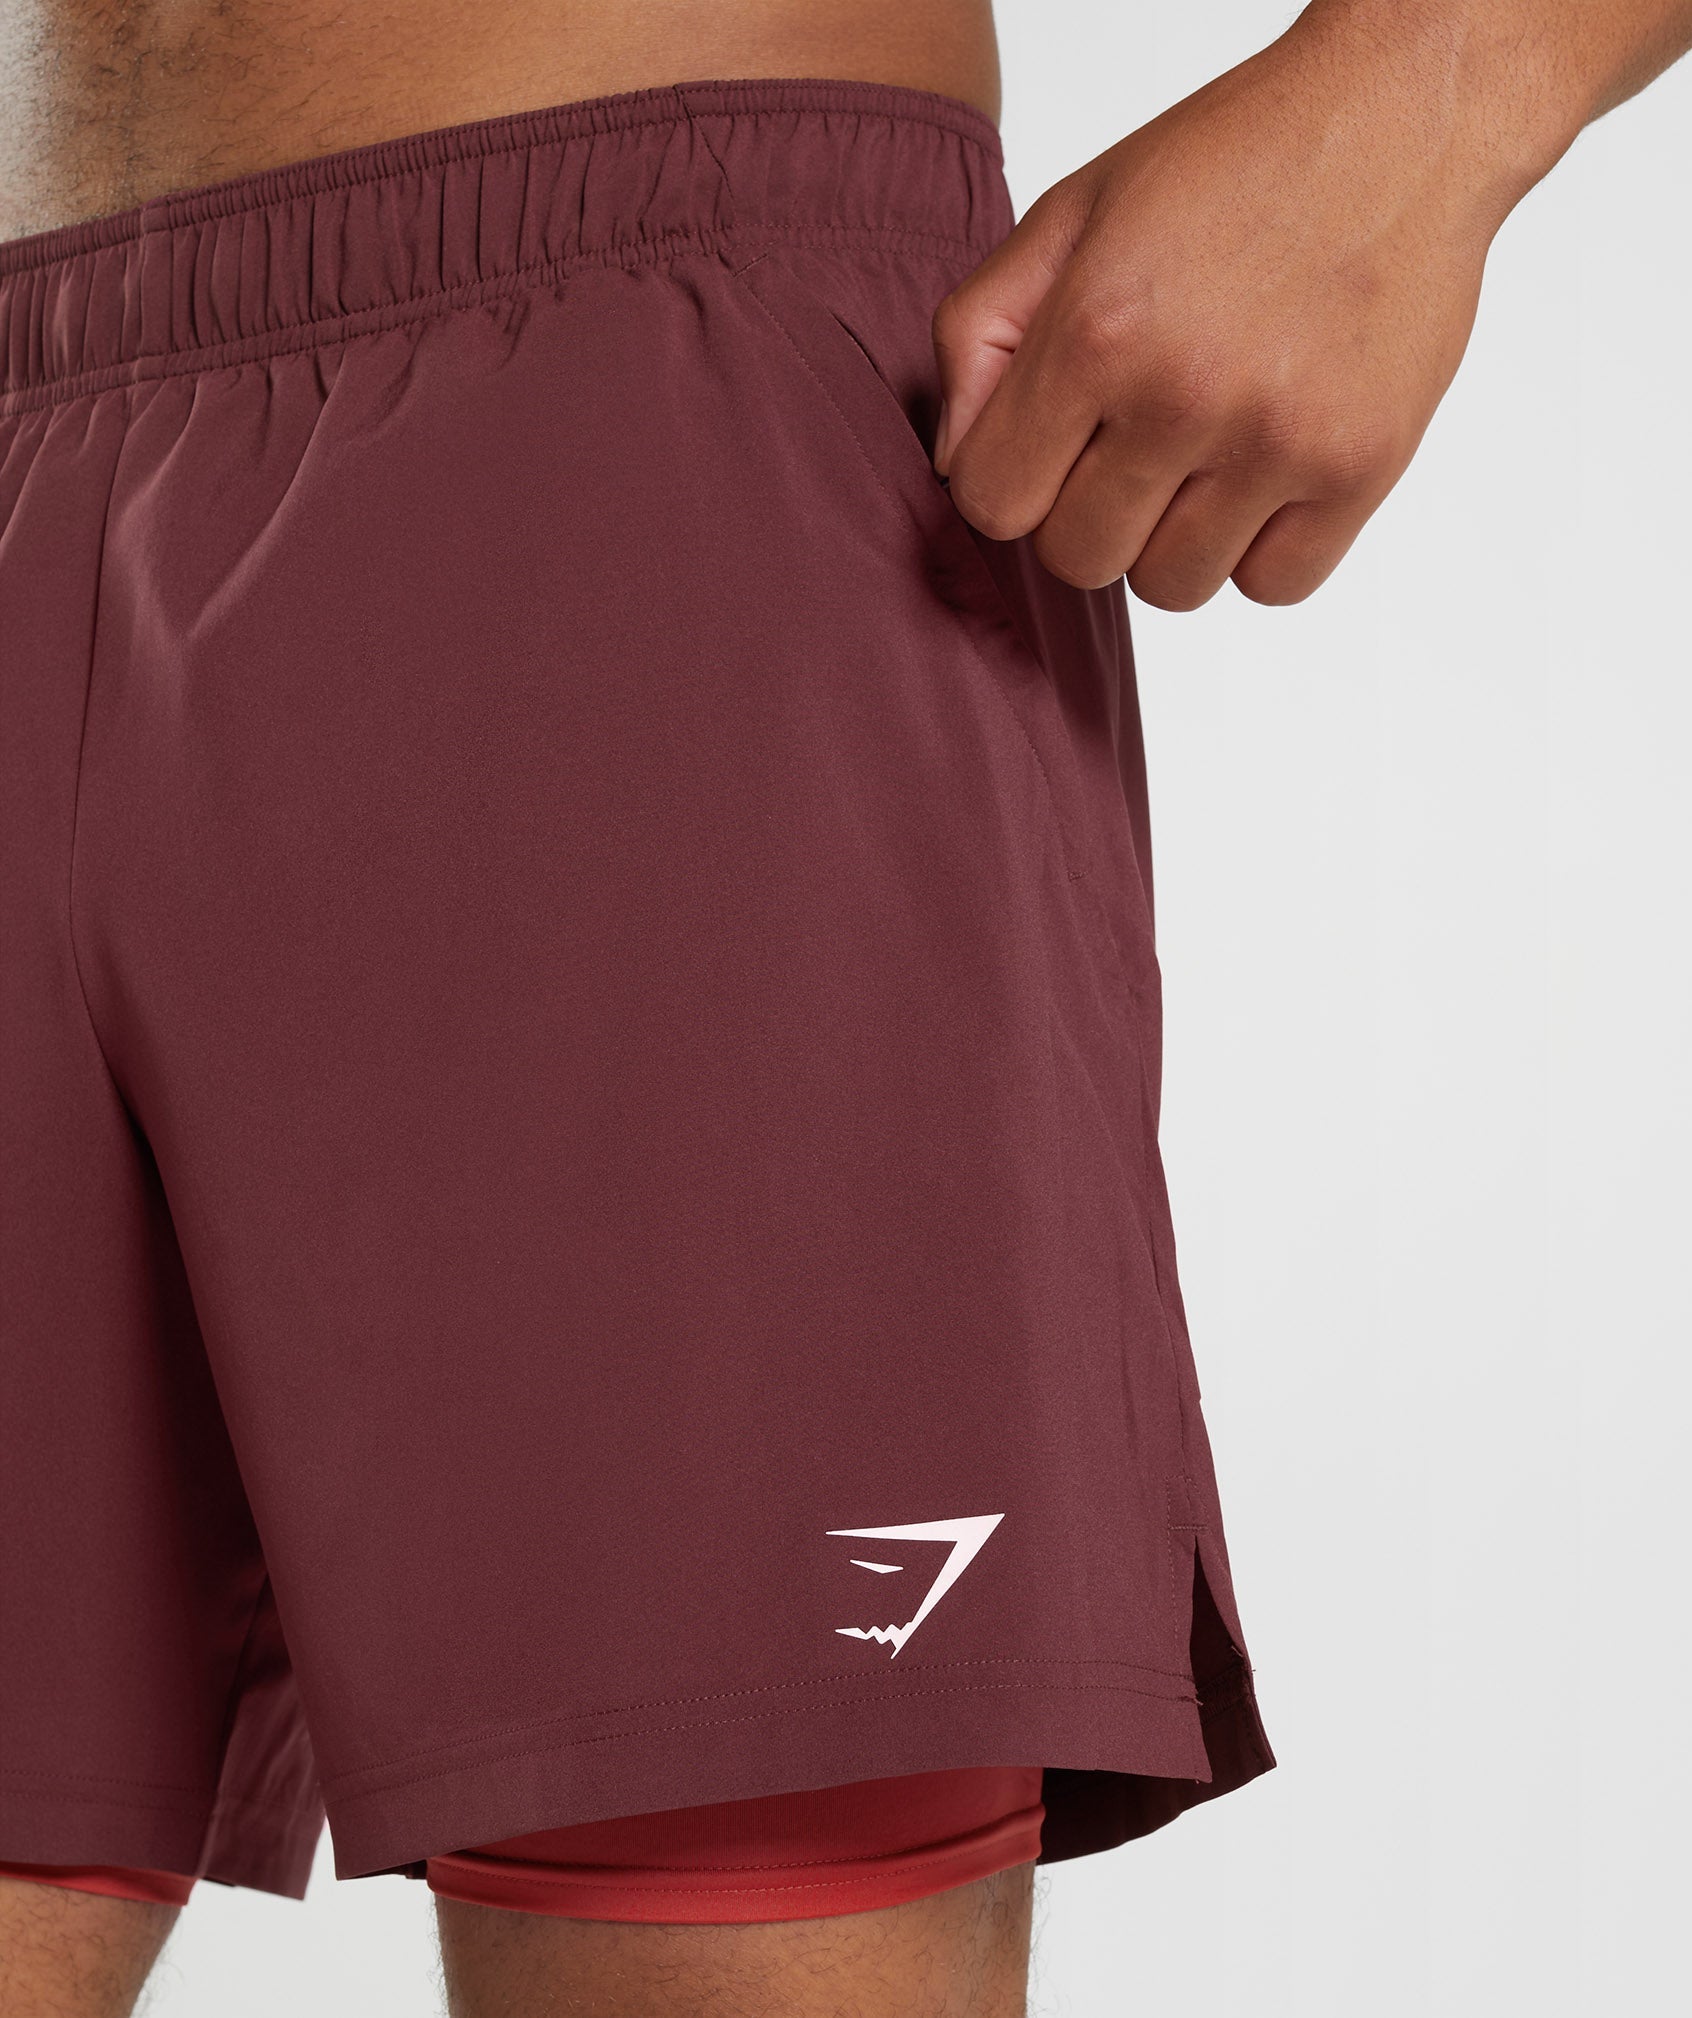 Sport 7" 2 In 1 Shorts in Baked Maroon/Salsa Red - view 6